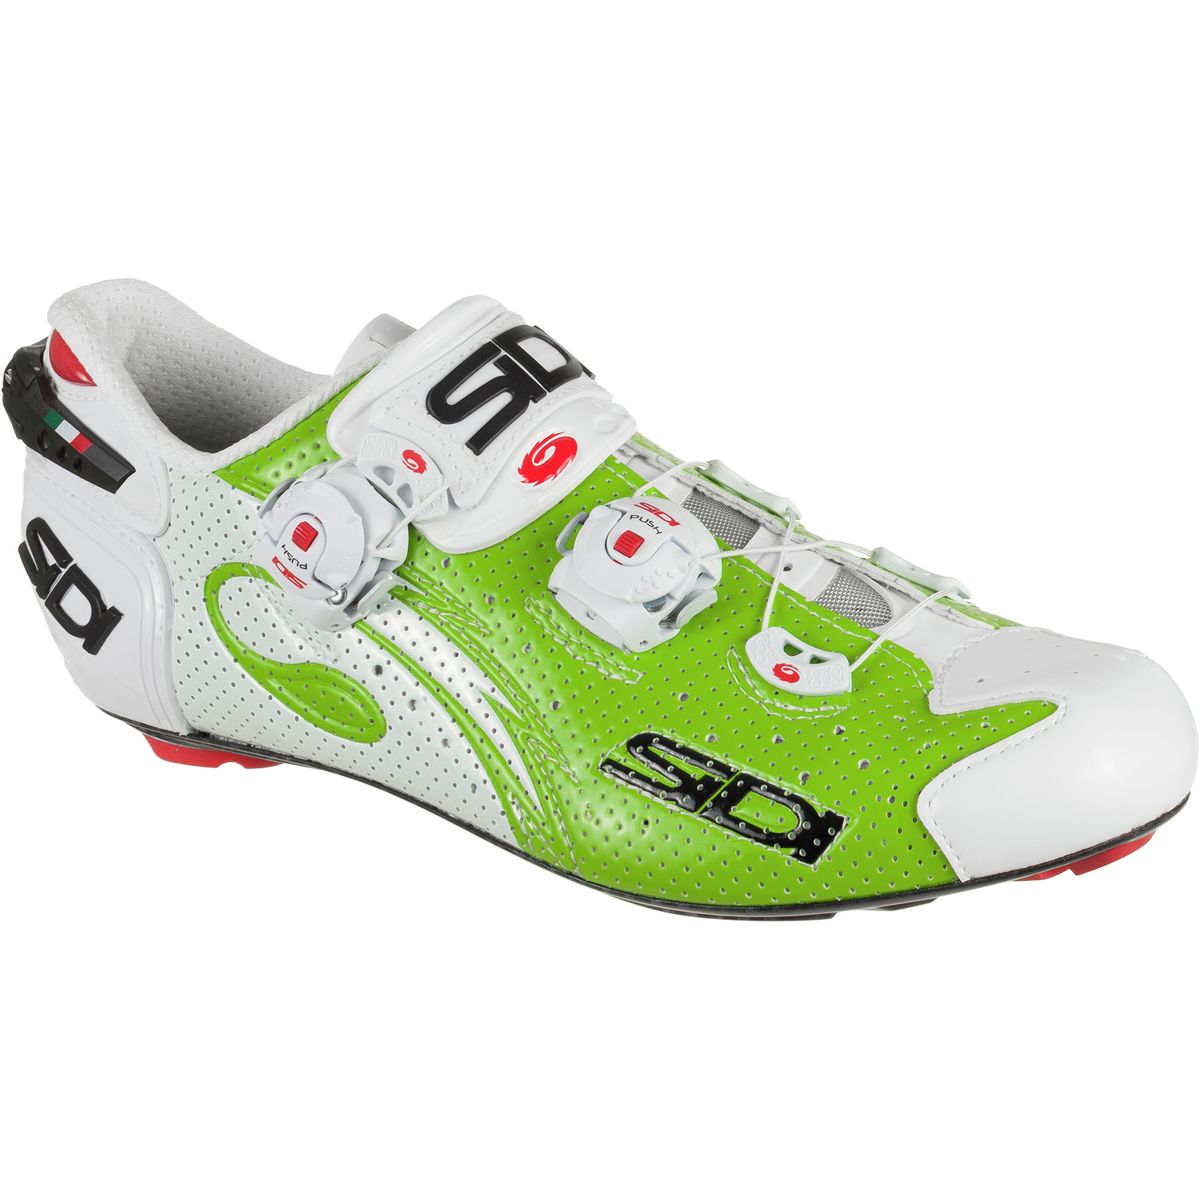 Sidi Wire Carbon Air Push Limited Edition Shoe Mens